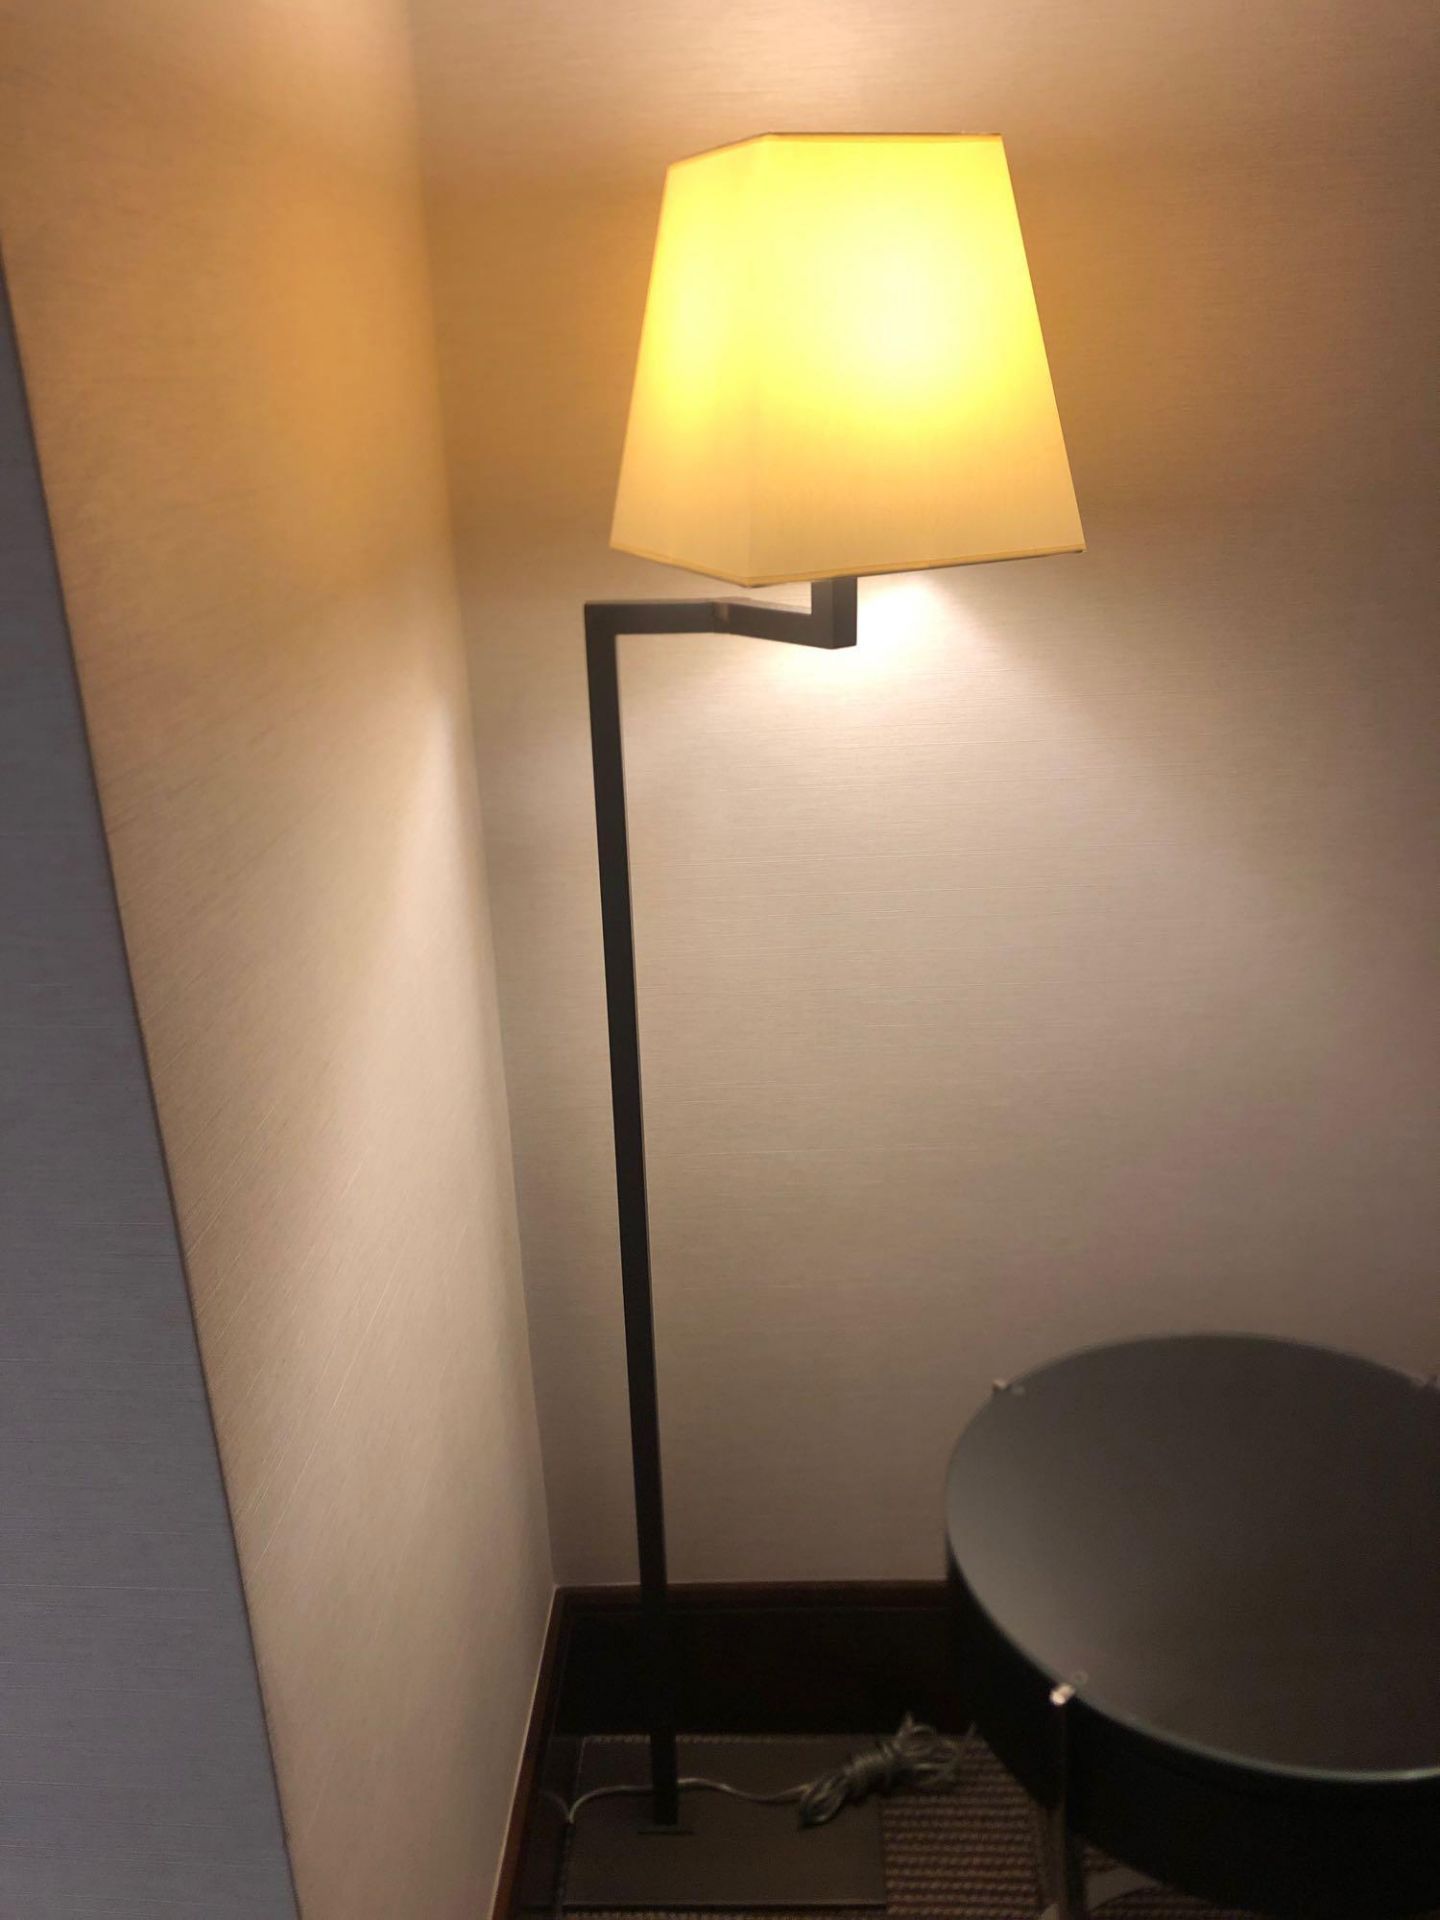 A pair of Sifra Floor Lamps Model LMS 600 ENG Metal Base With Single Arm Single Bulb Complete With